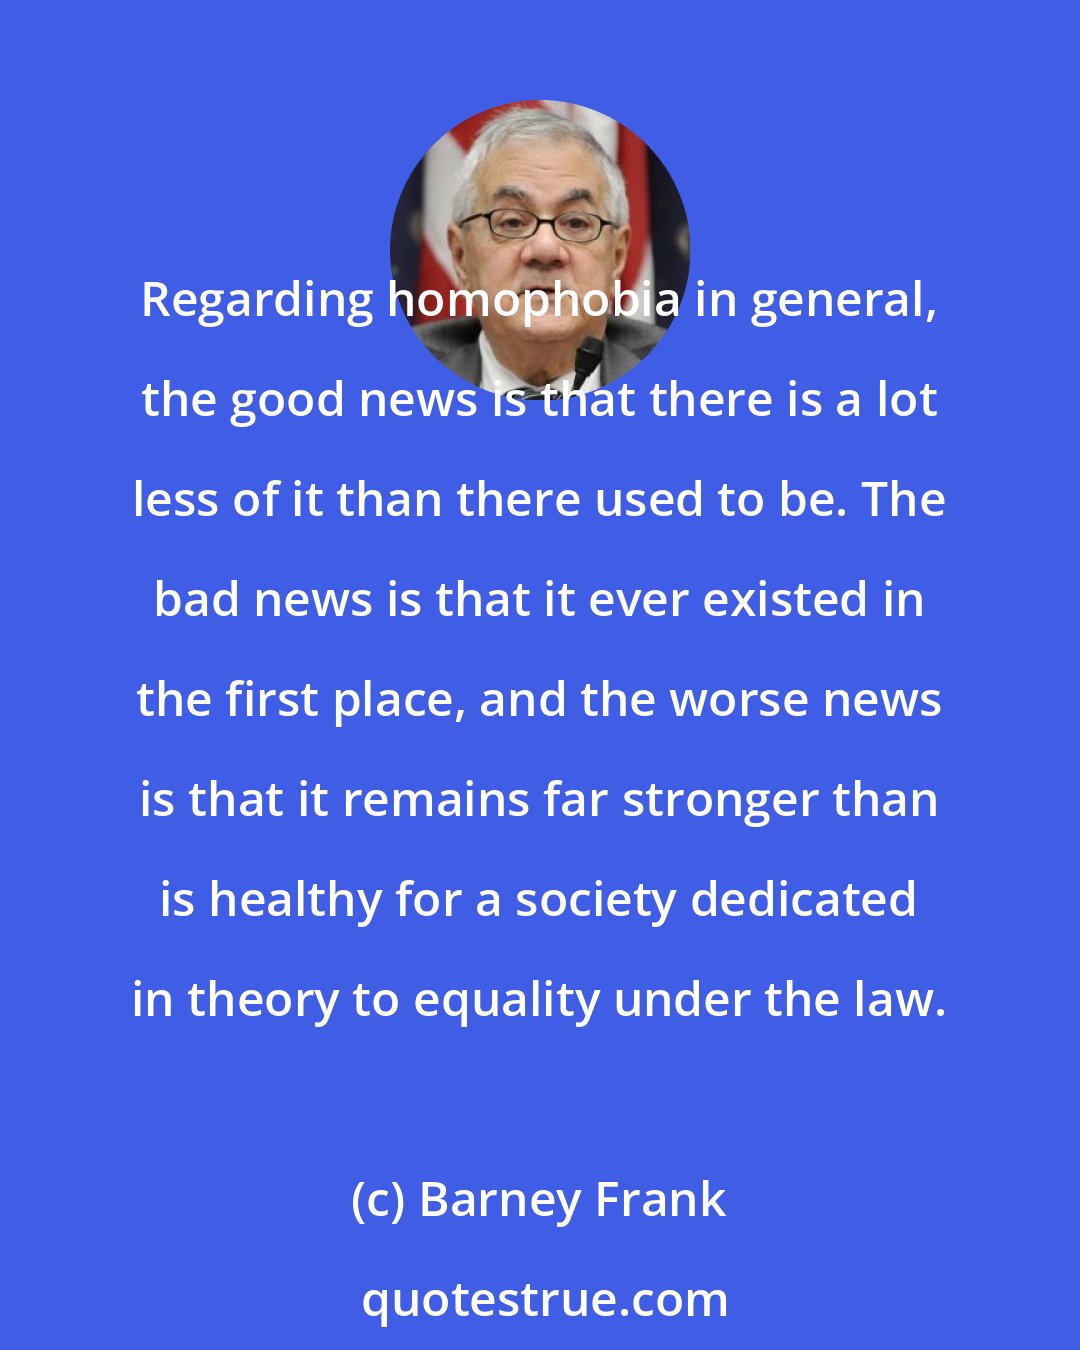 Barney Frank: Regarding homophobia in general, the good news is that there is a lot less of it than there used to be. The bad news is that it ever existed in the first place, and the worse news is that it remains far stronger than is healthy for a society dedicated in theory to equality under the law.